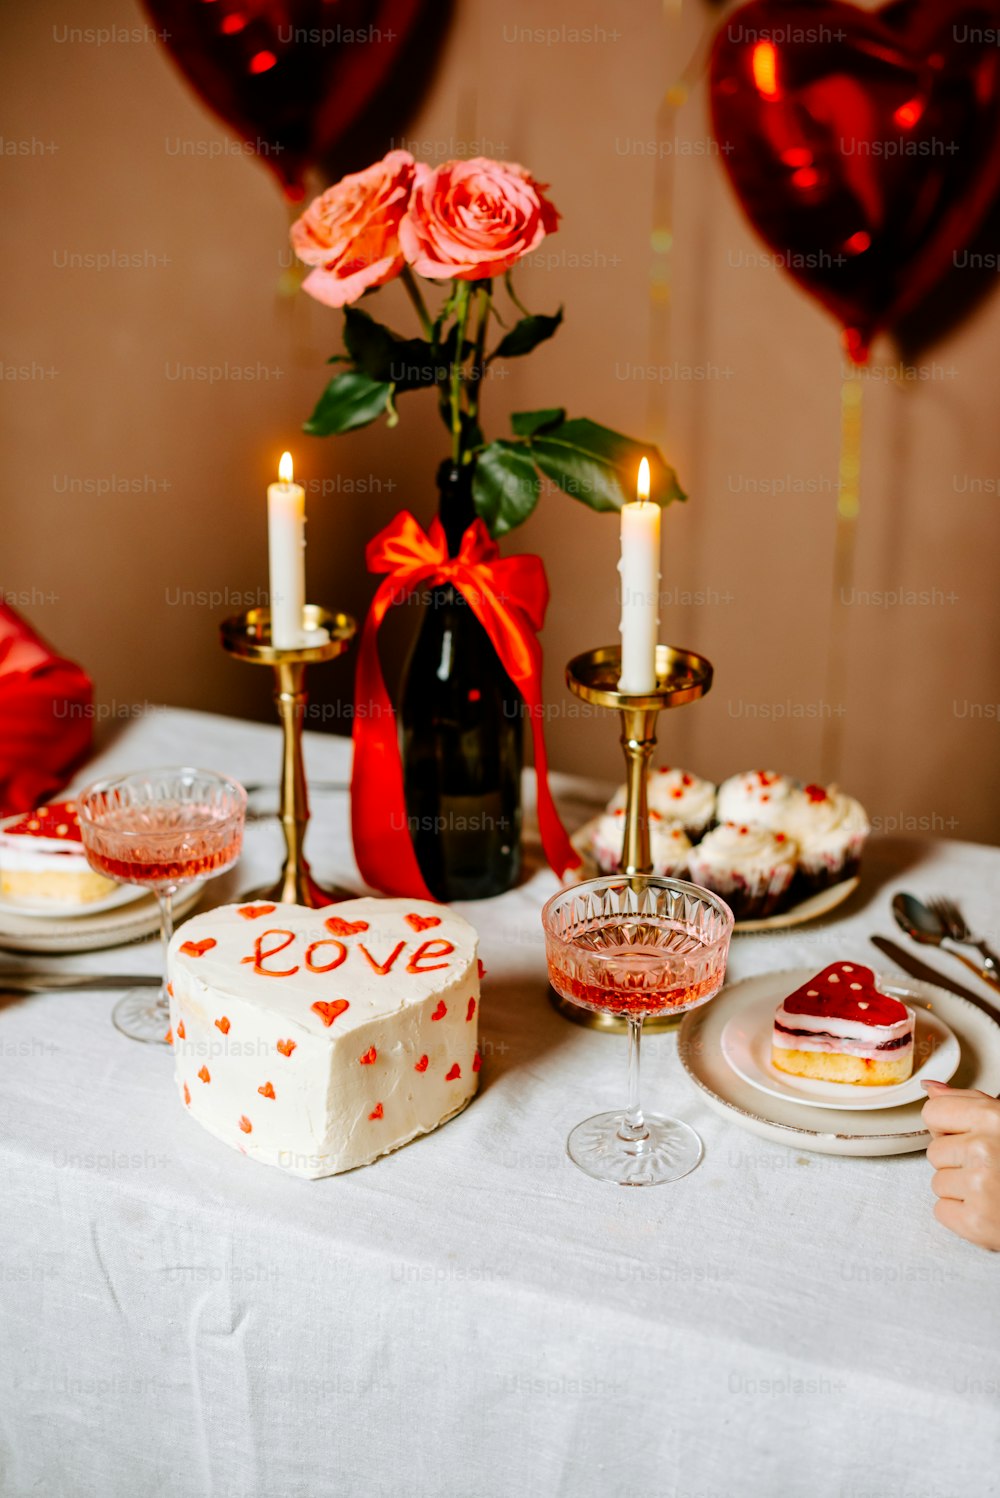 a table topped with a cake next to a bottle of wine